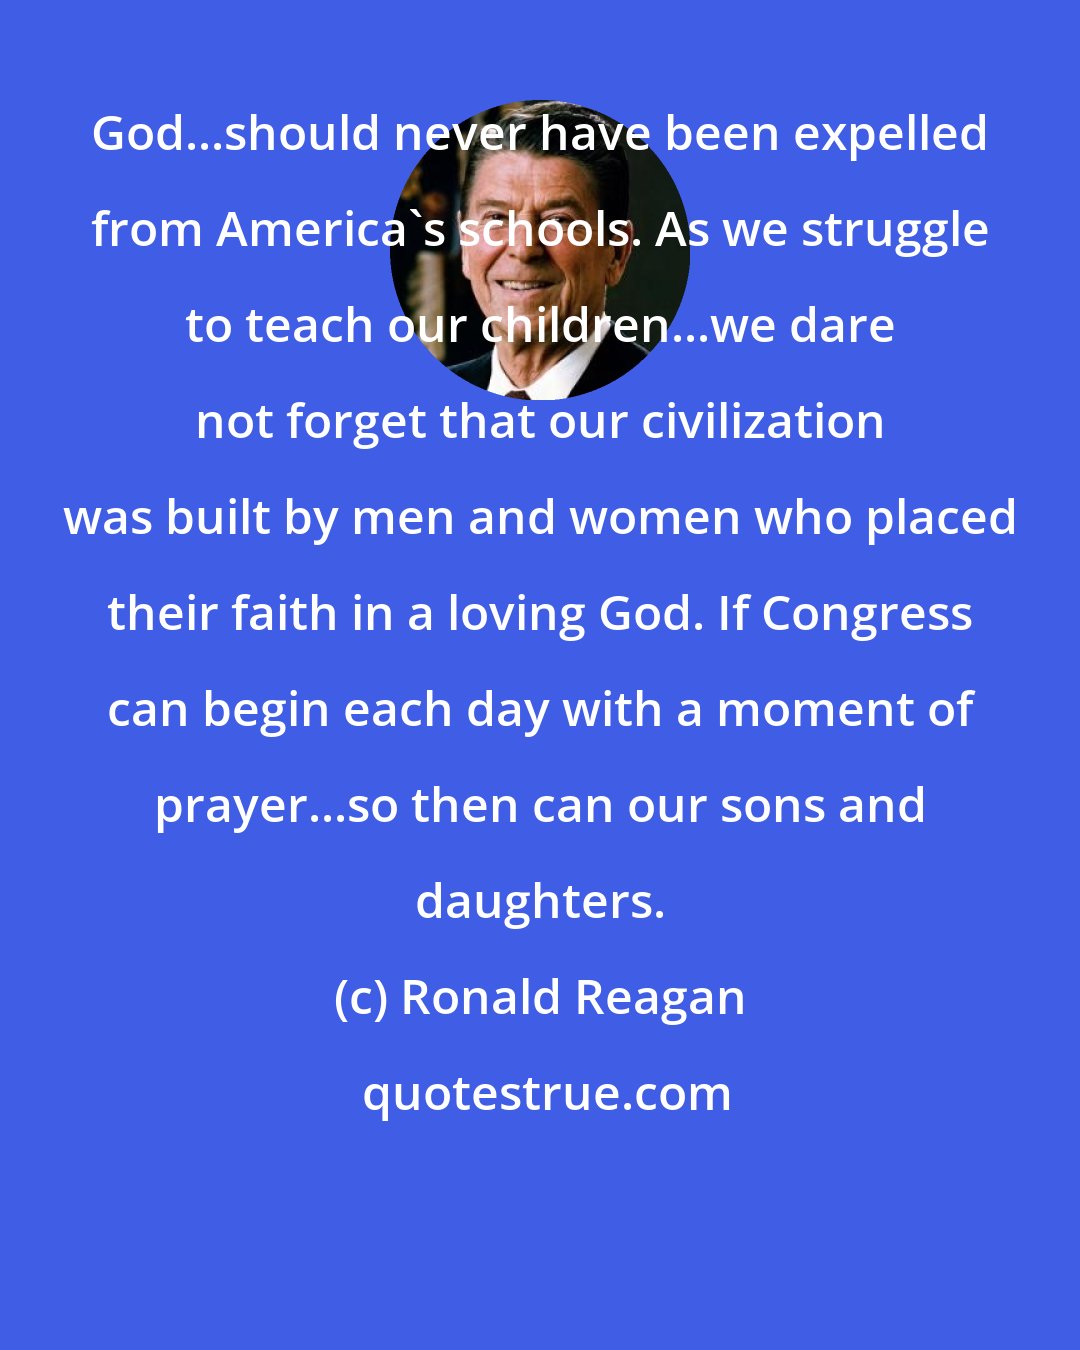 Ronald Reagan: God...should never have been expelled from America's schools. As we struggle to teach our children...we dare not forget that our civilization was built by men and women who placed their faith in a loving God. If Congress can begin each day with a moment of prayer...so then can our sons and daughters.